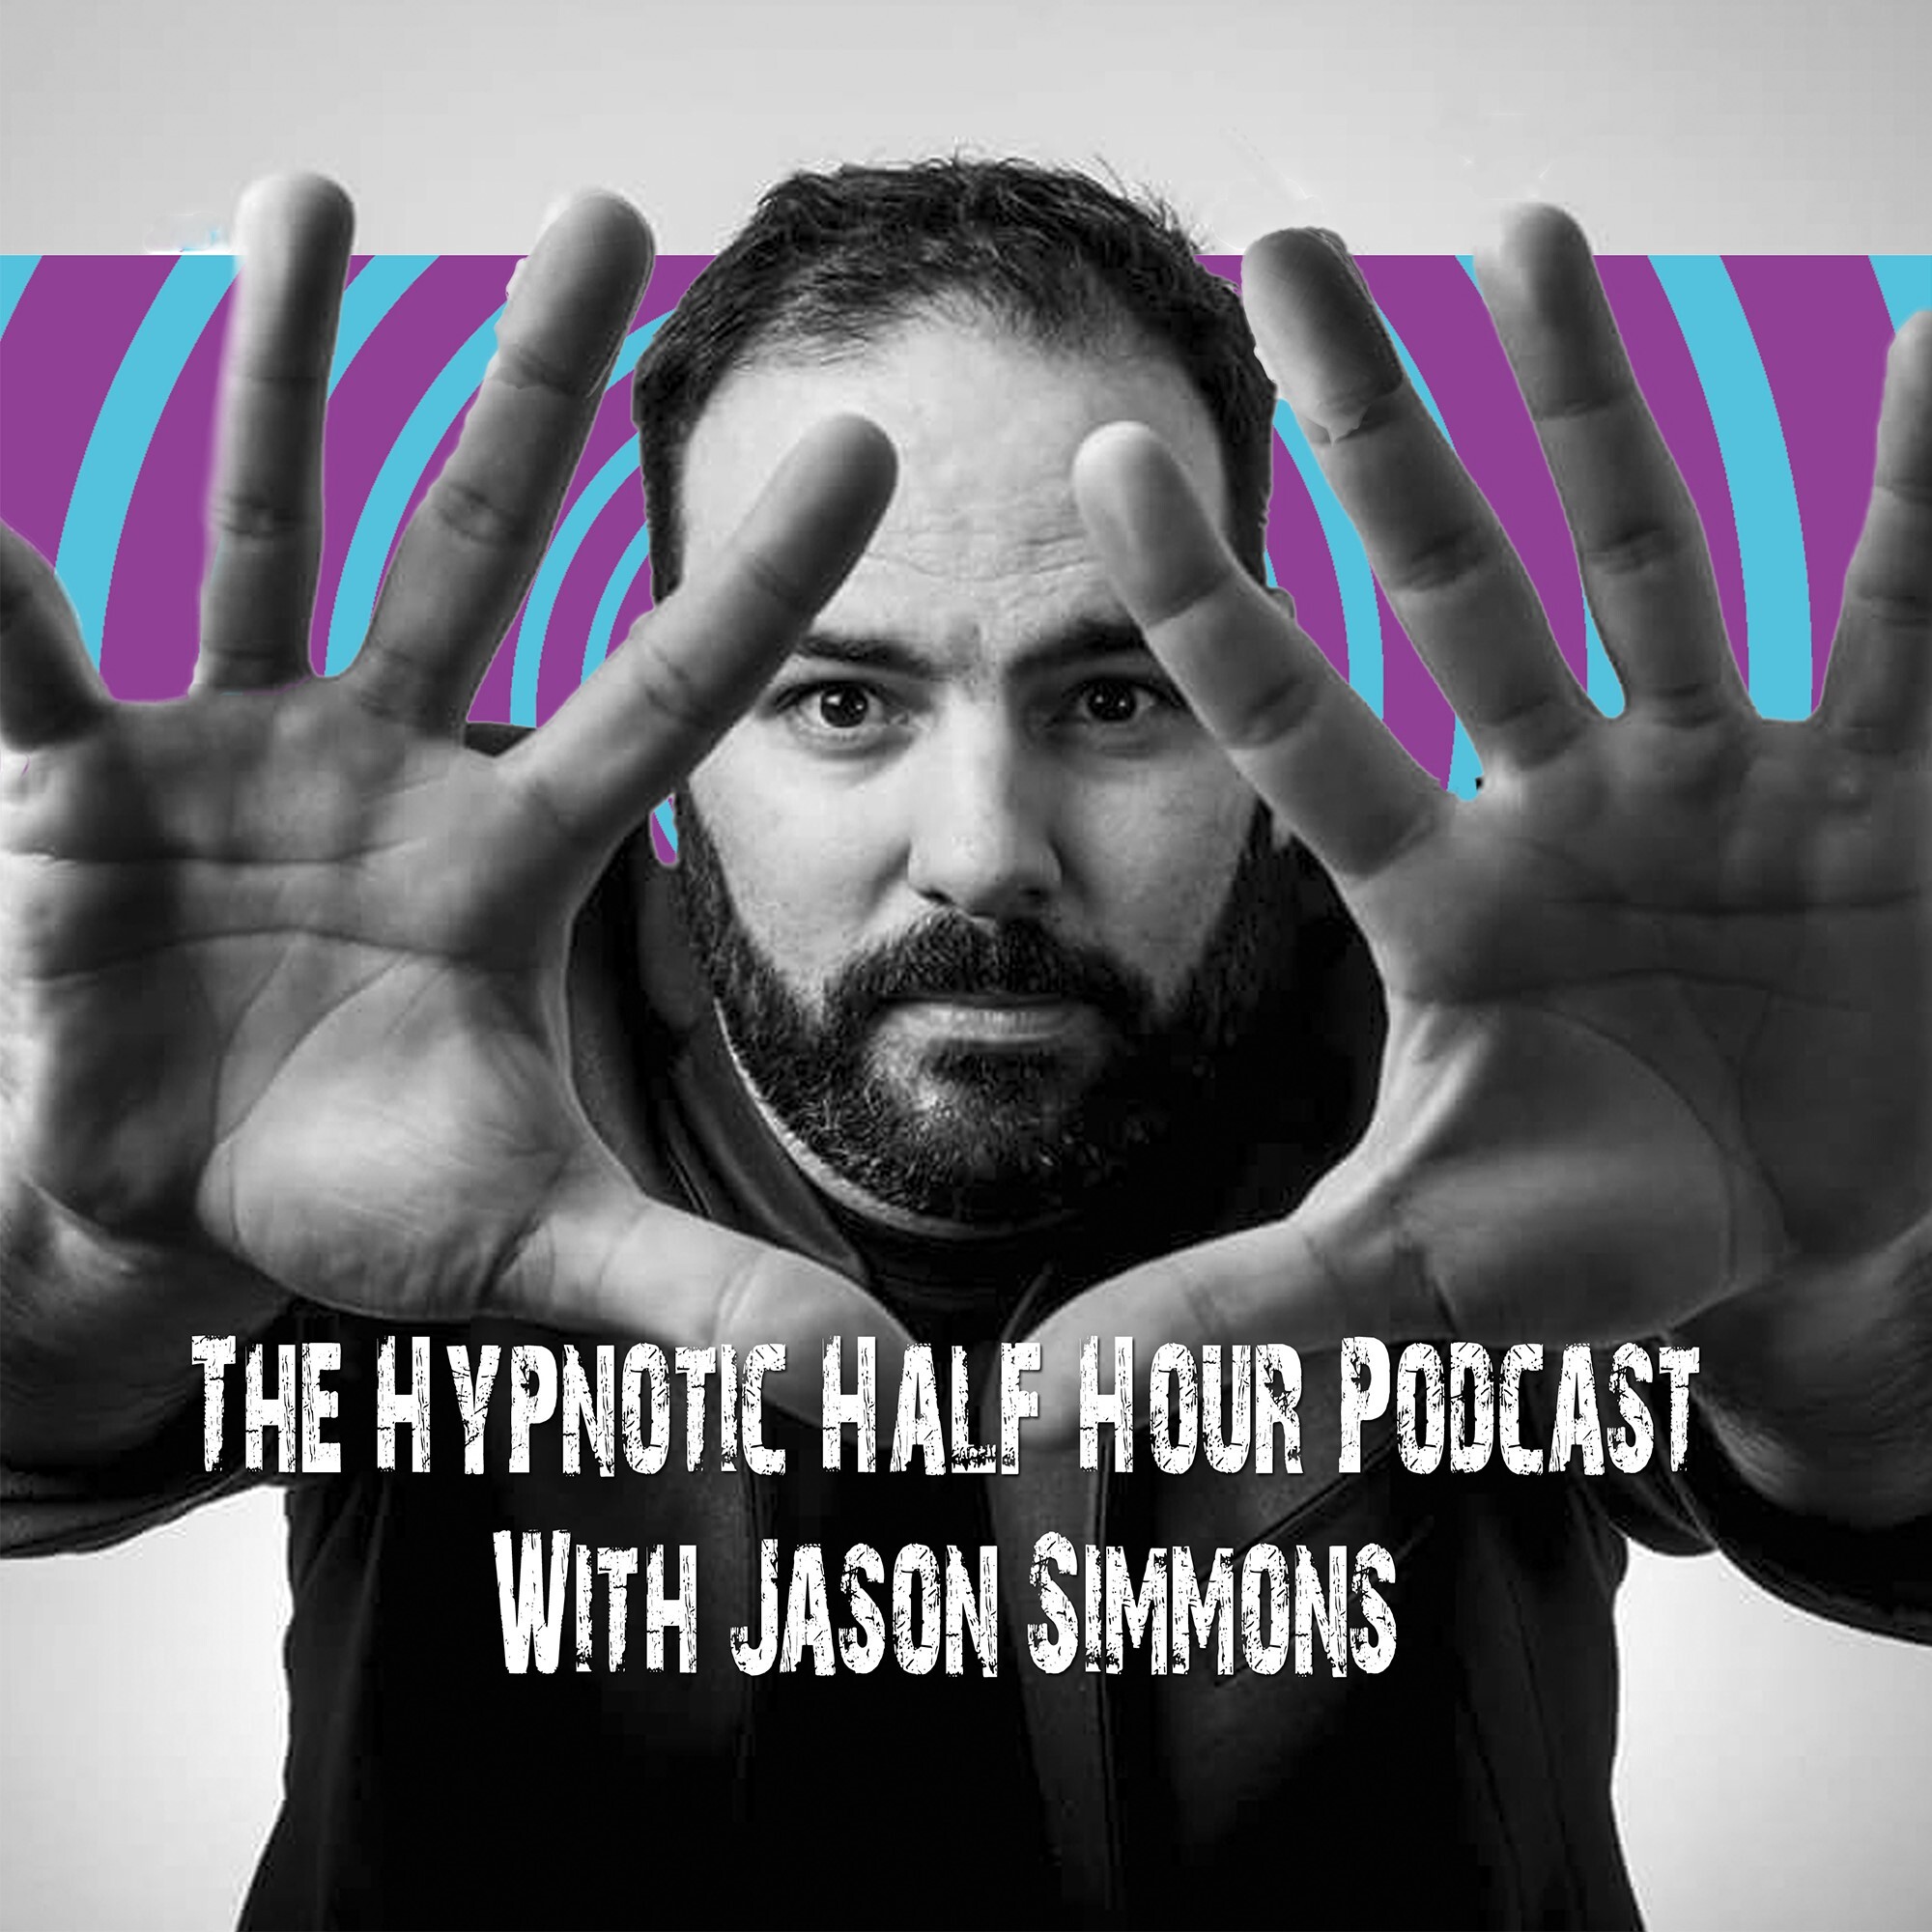 The Hypnotic Half Hour Podcast With Jason Simmons